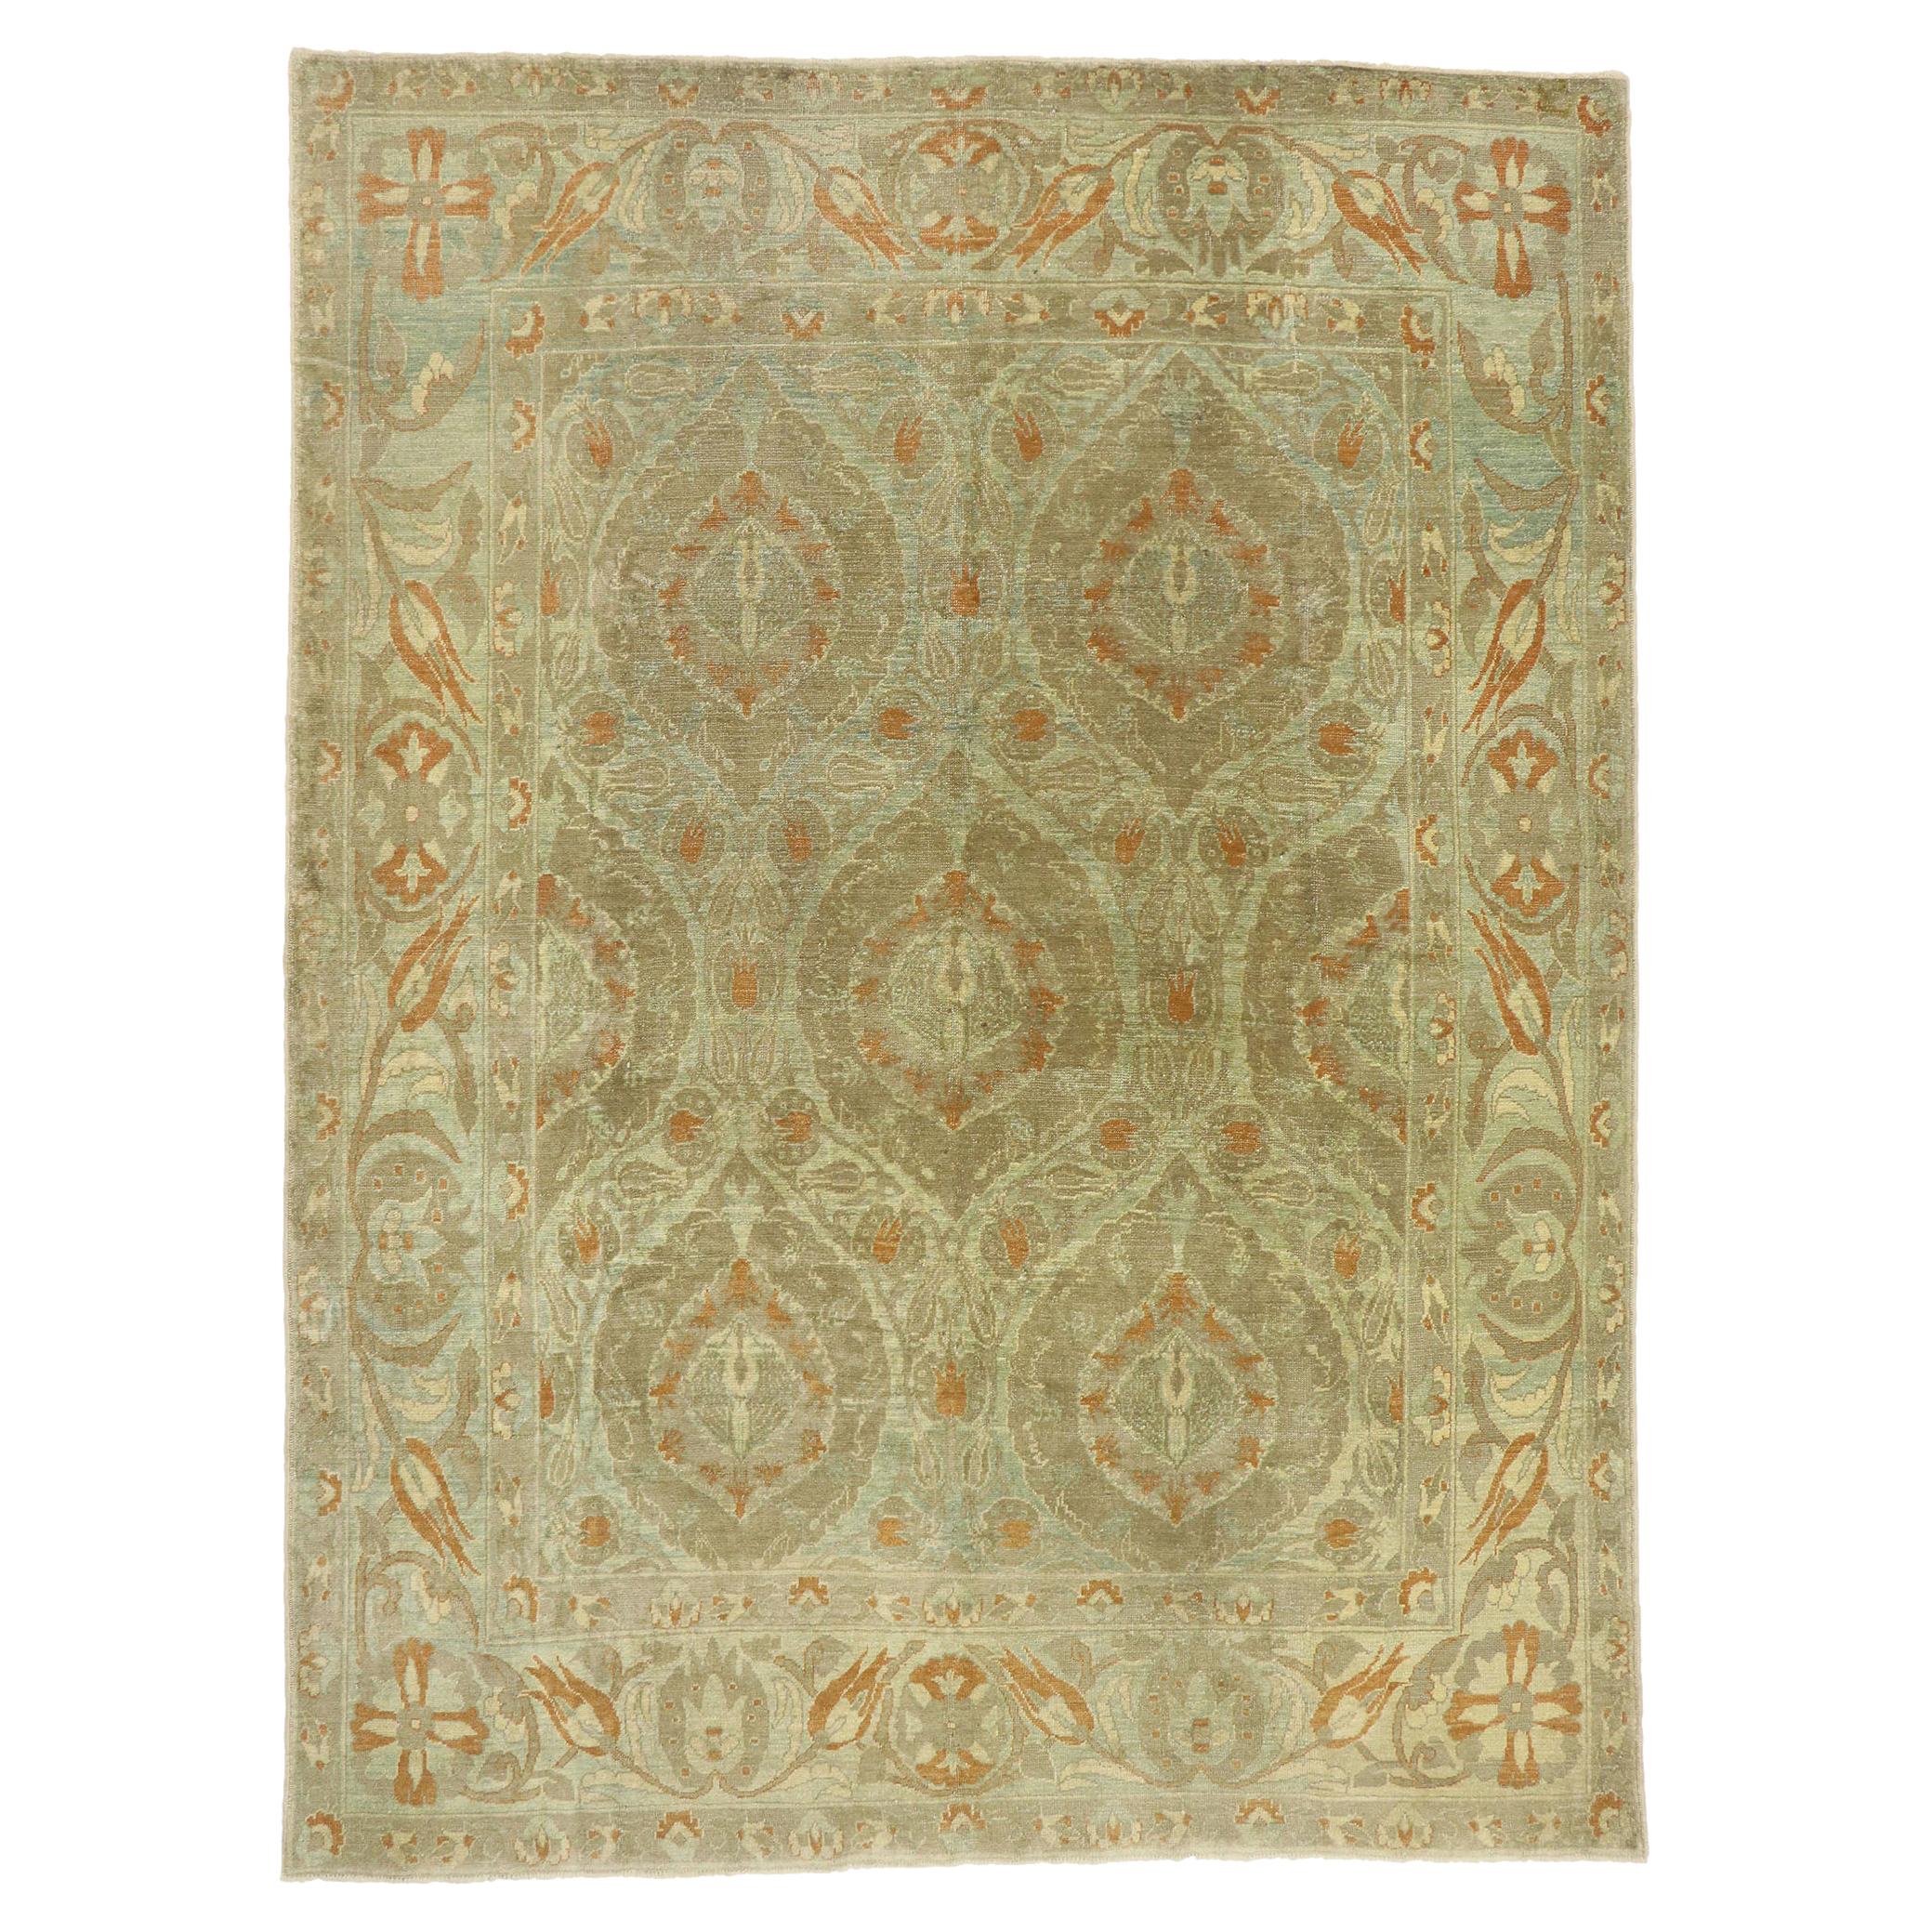 New Turkish Oushak Rug with Arts & Crafts Style Inspired by William Morris For Sale